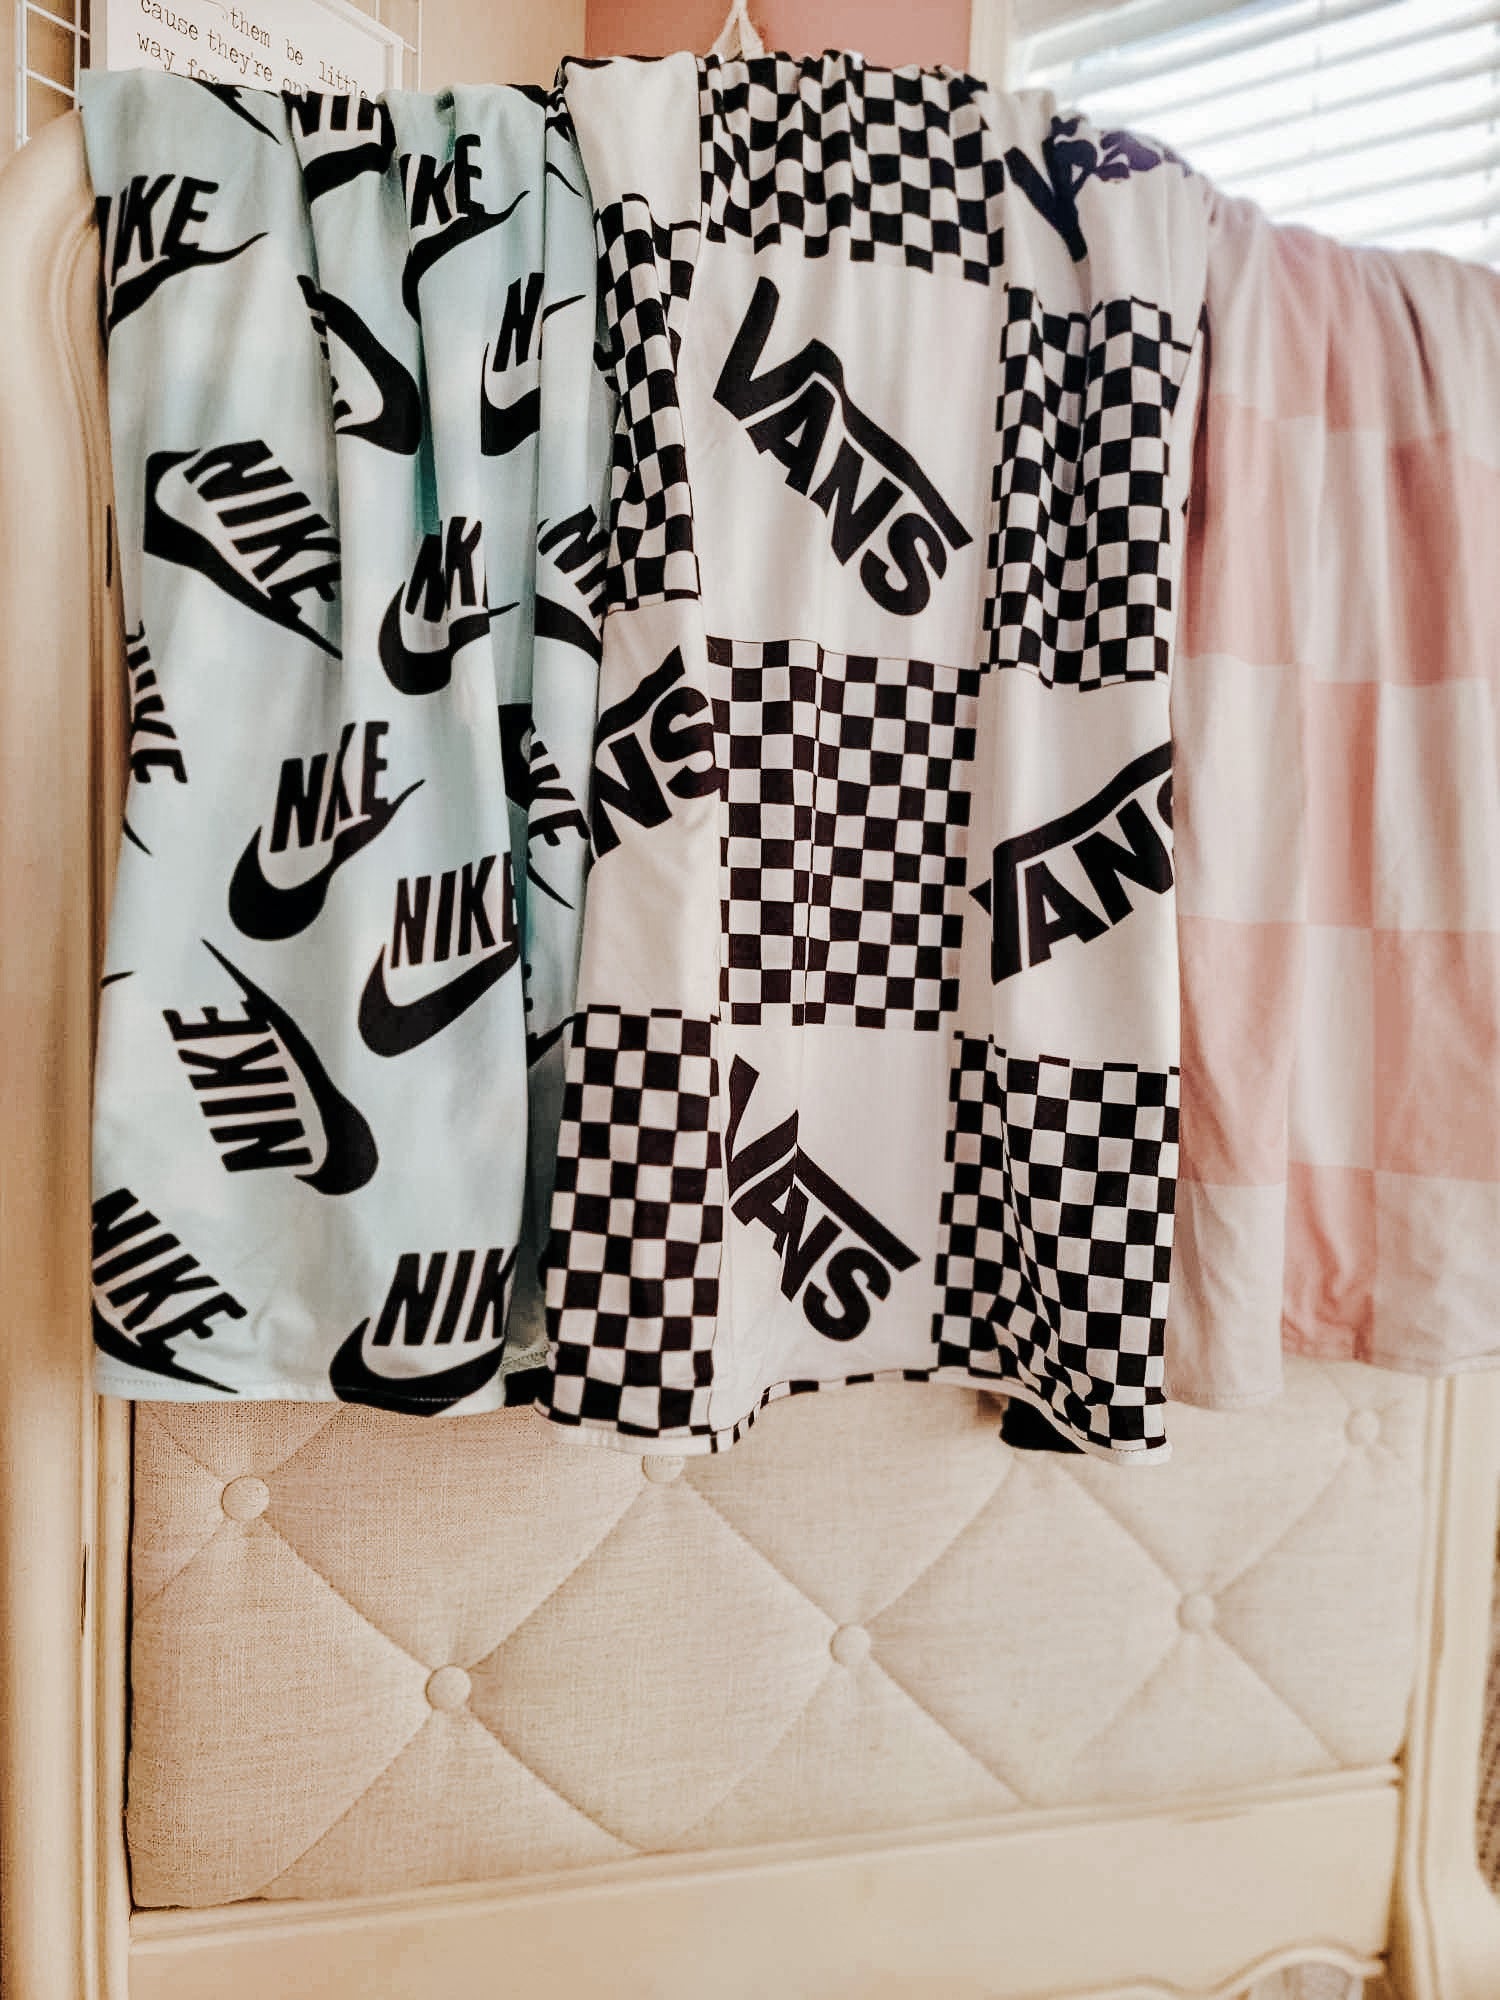 all 3 of our blankets - from left to right - Blue Nike, White Vans, Blush/Tan Check